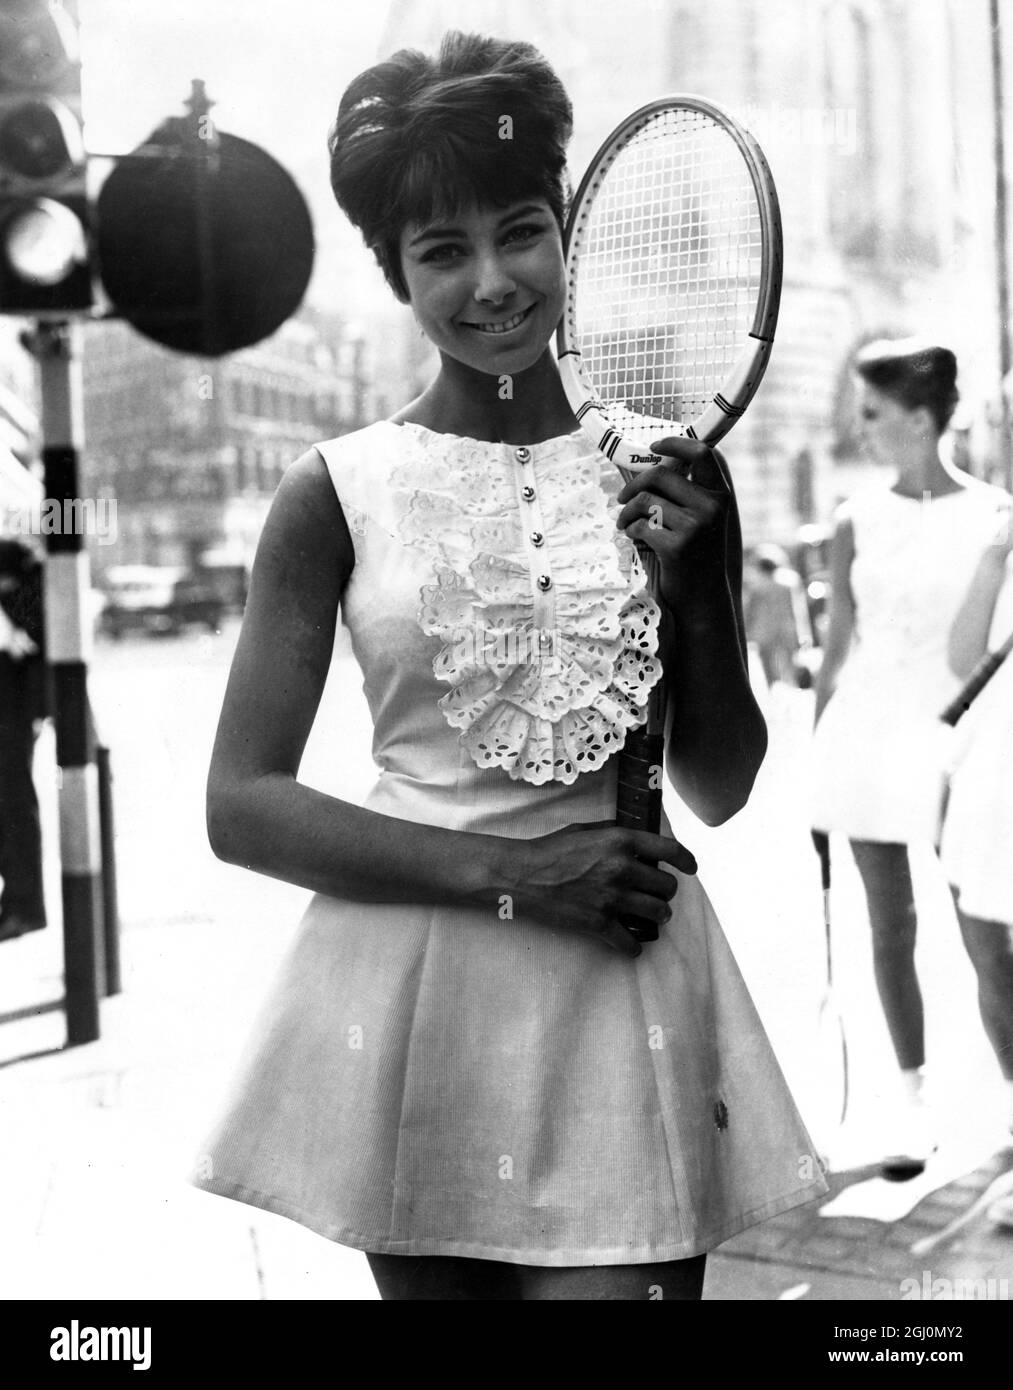 Sandra Russell in Pique outfit with Broderie Anglais front as part of the Fred  Perry tennis designs for Wimbledon 12 June 1963 Stock Photo - Alamy